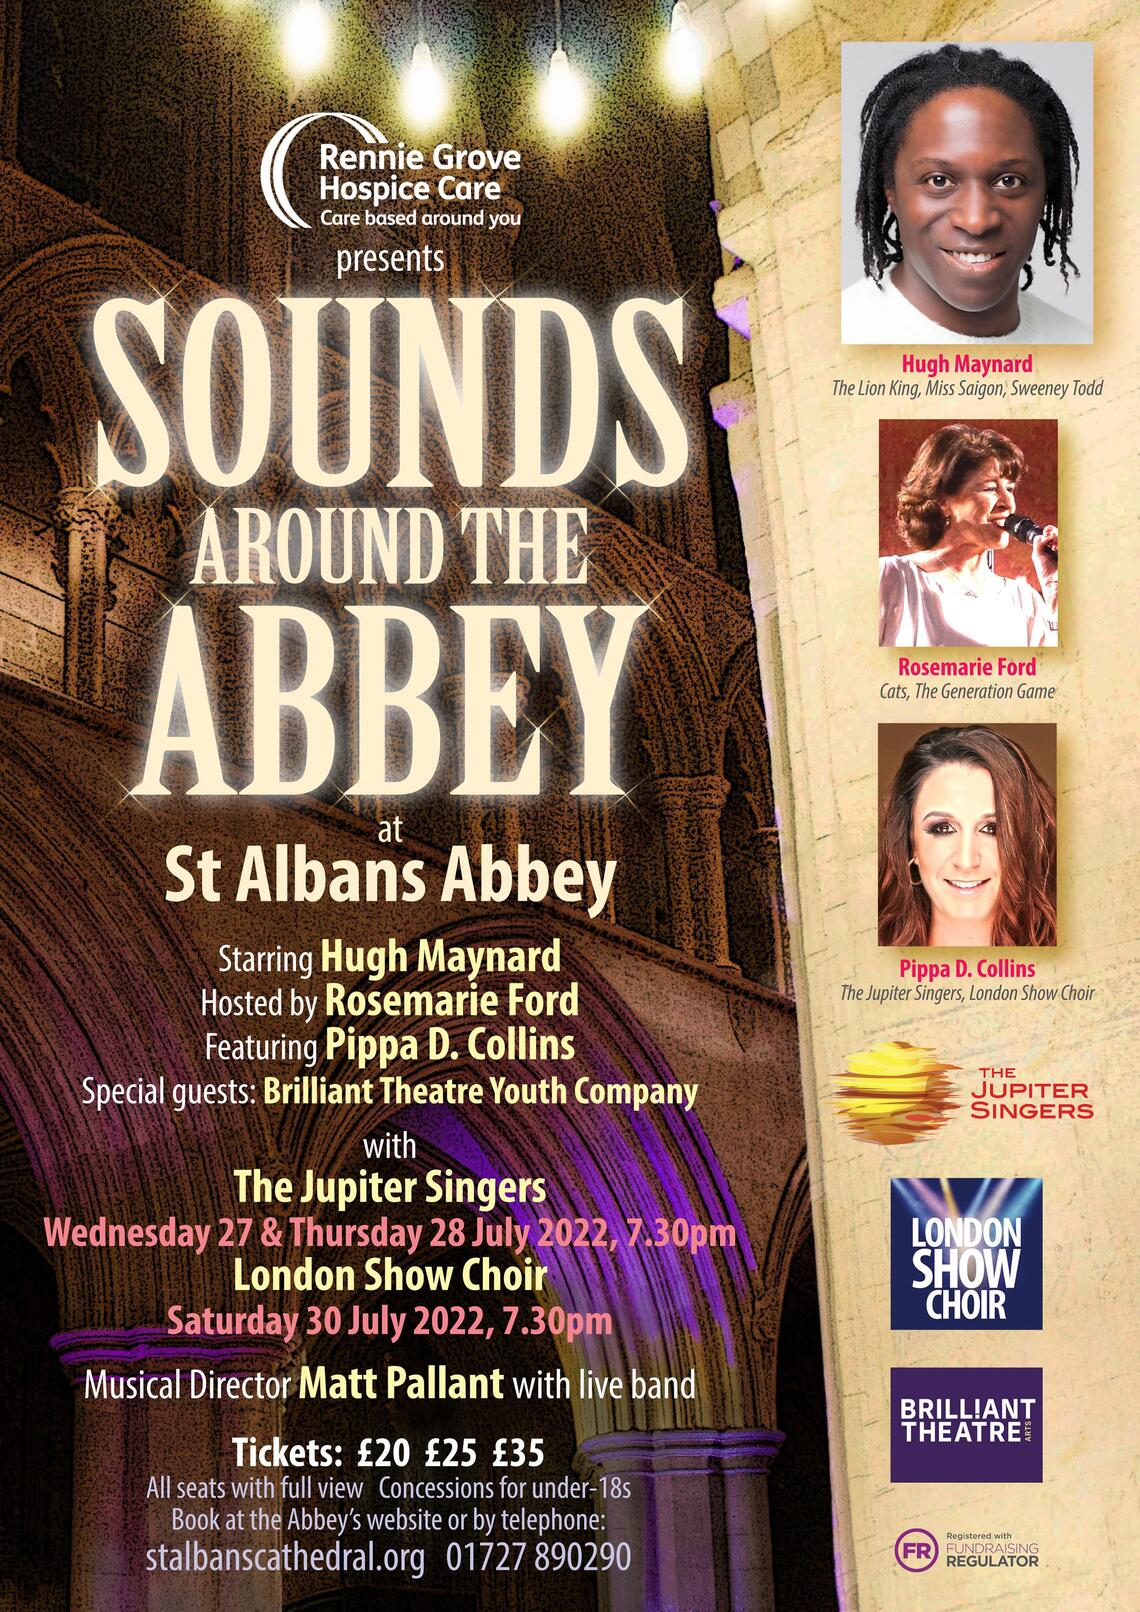 RG Sounds around the Abbey